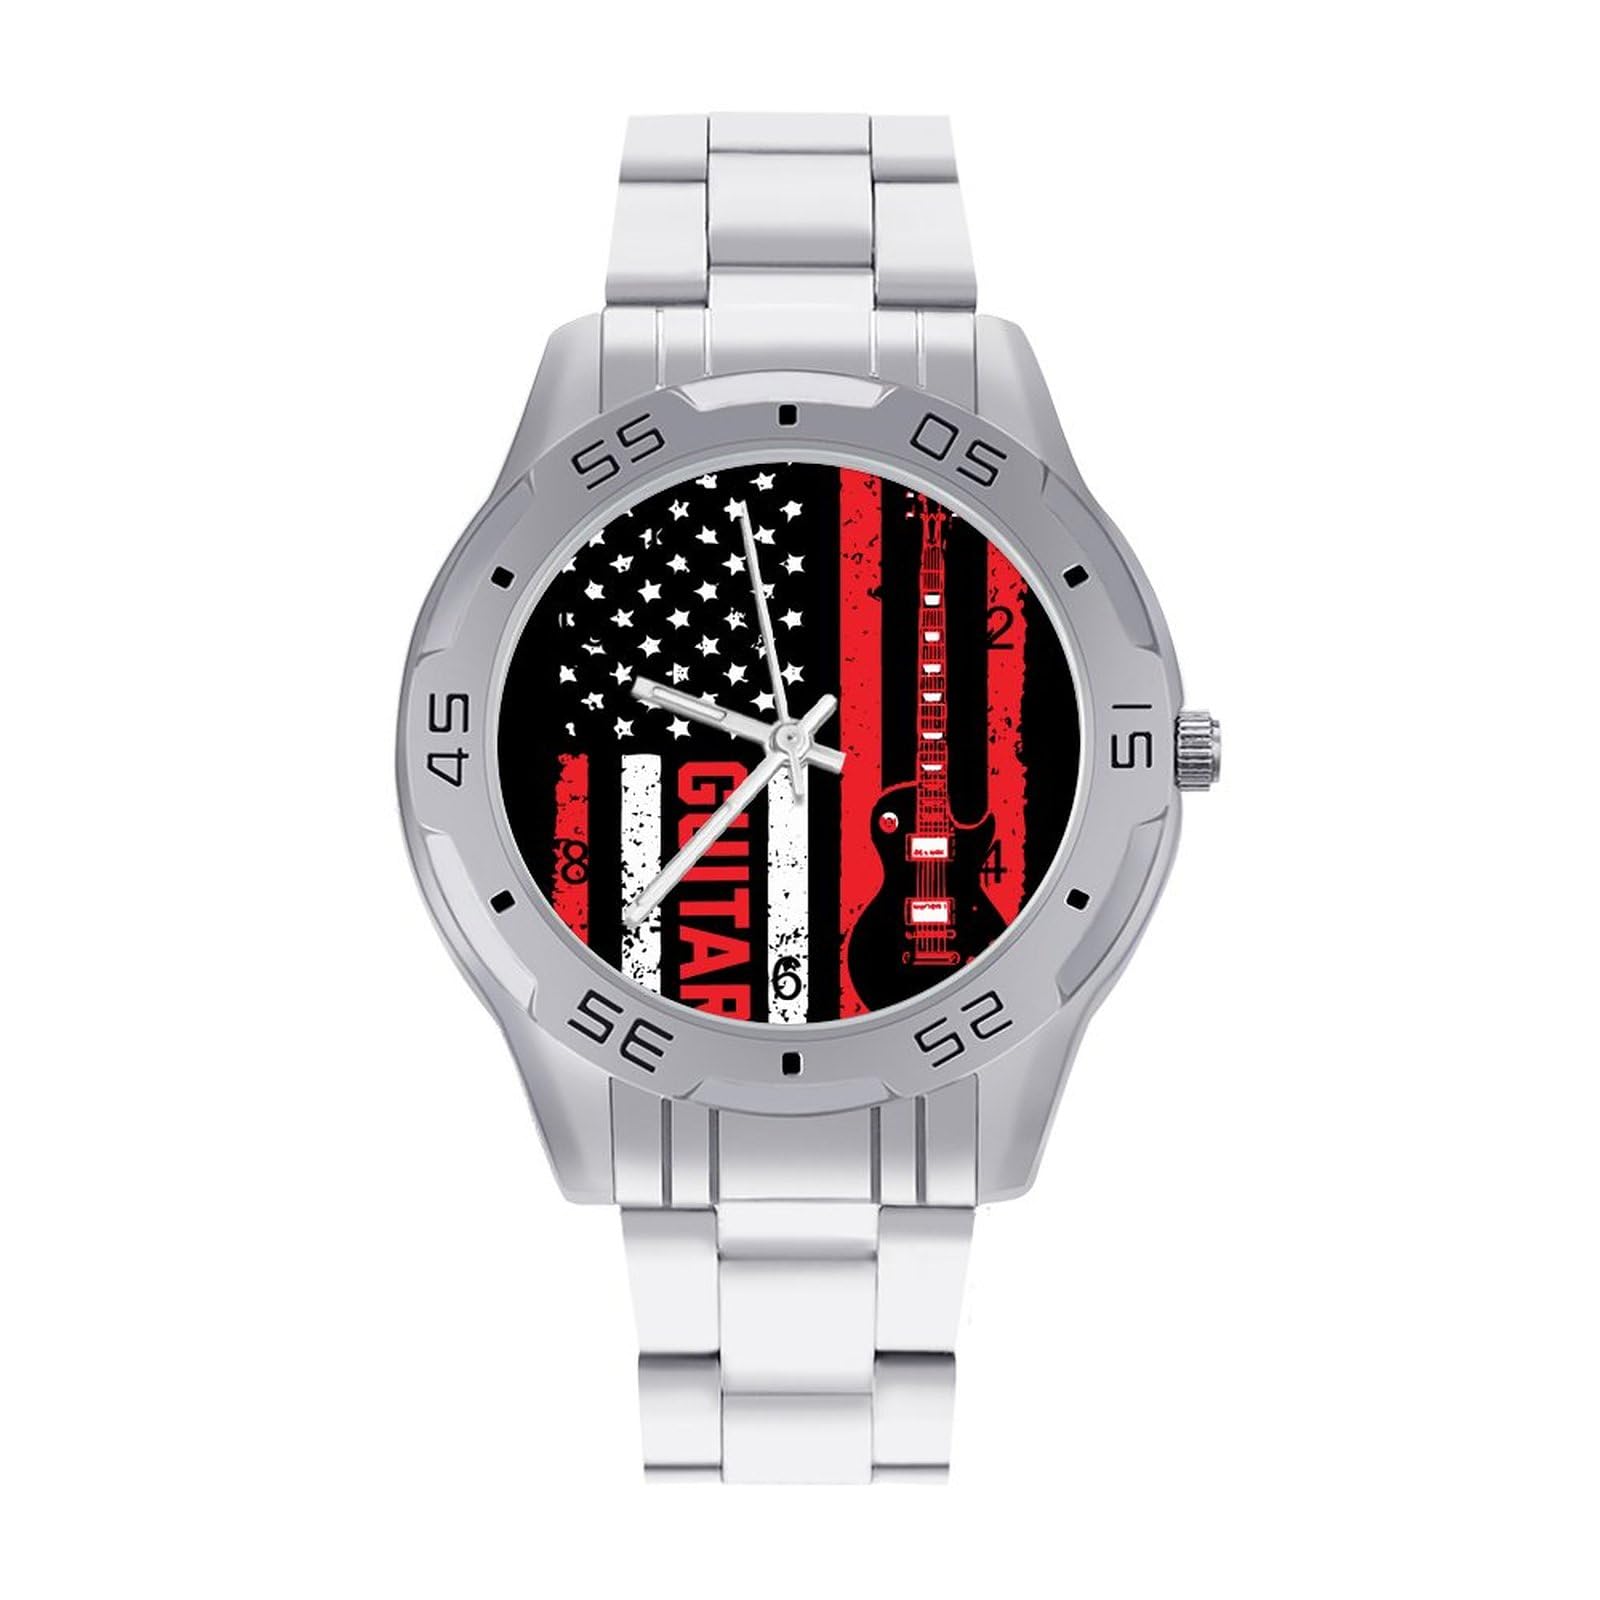 Guitar with American Flag Stainless Steel Band Business Watch Dress Wrist Unique Luxury Work Casual Waterproof Watches